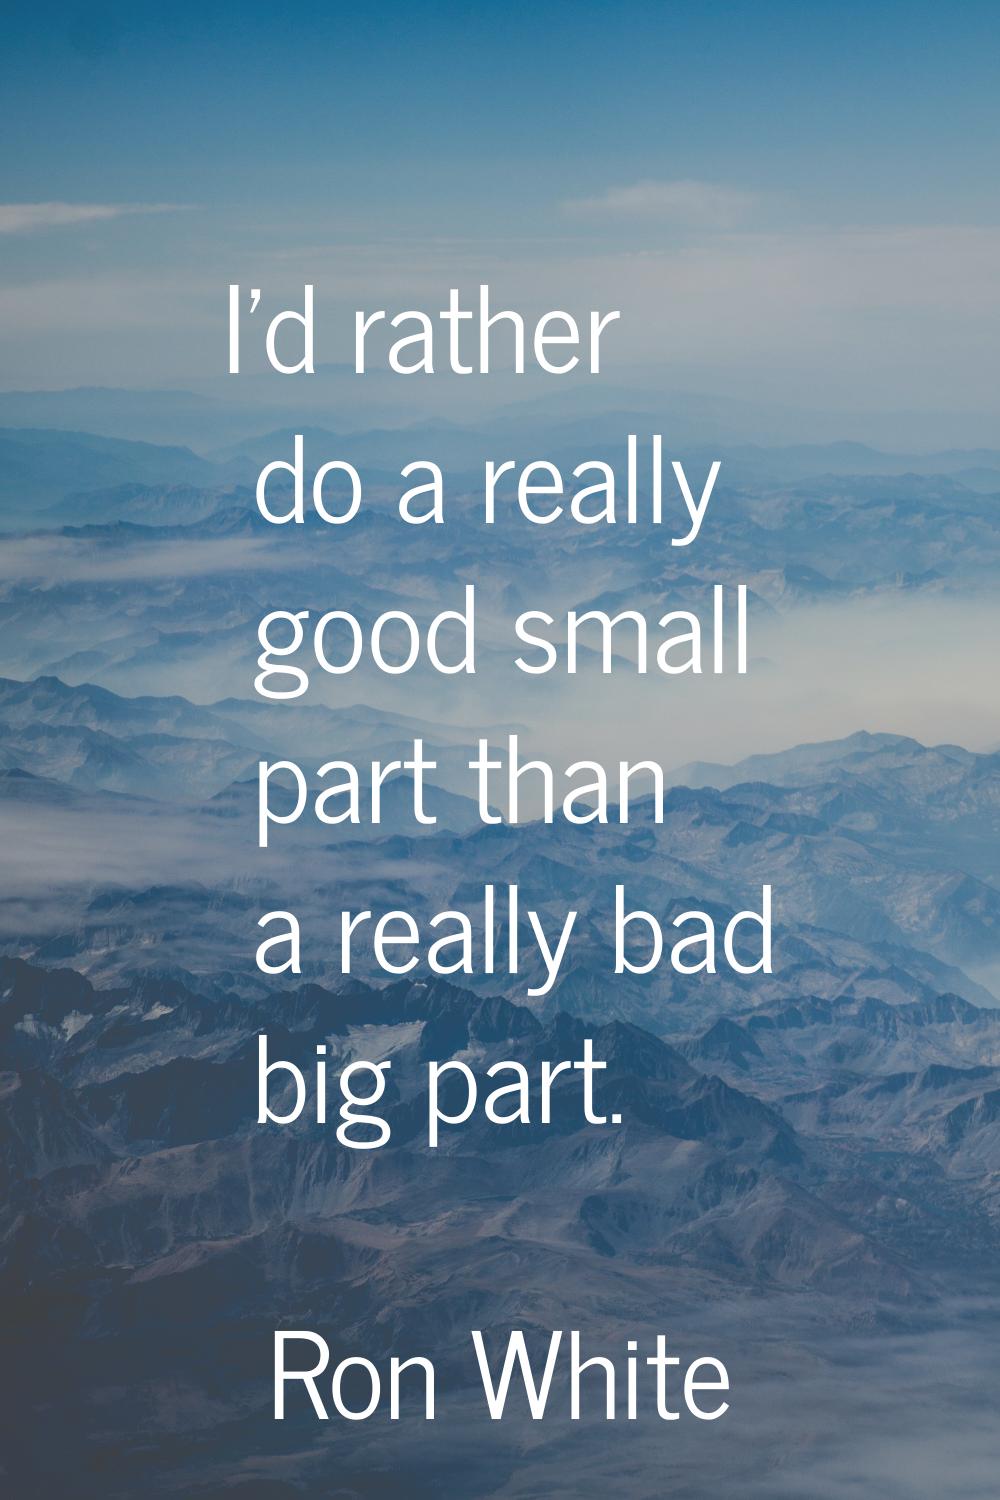 I'd rather do a really good small part than a really bad big part.